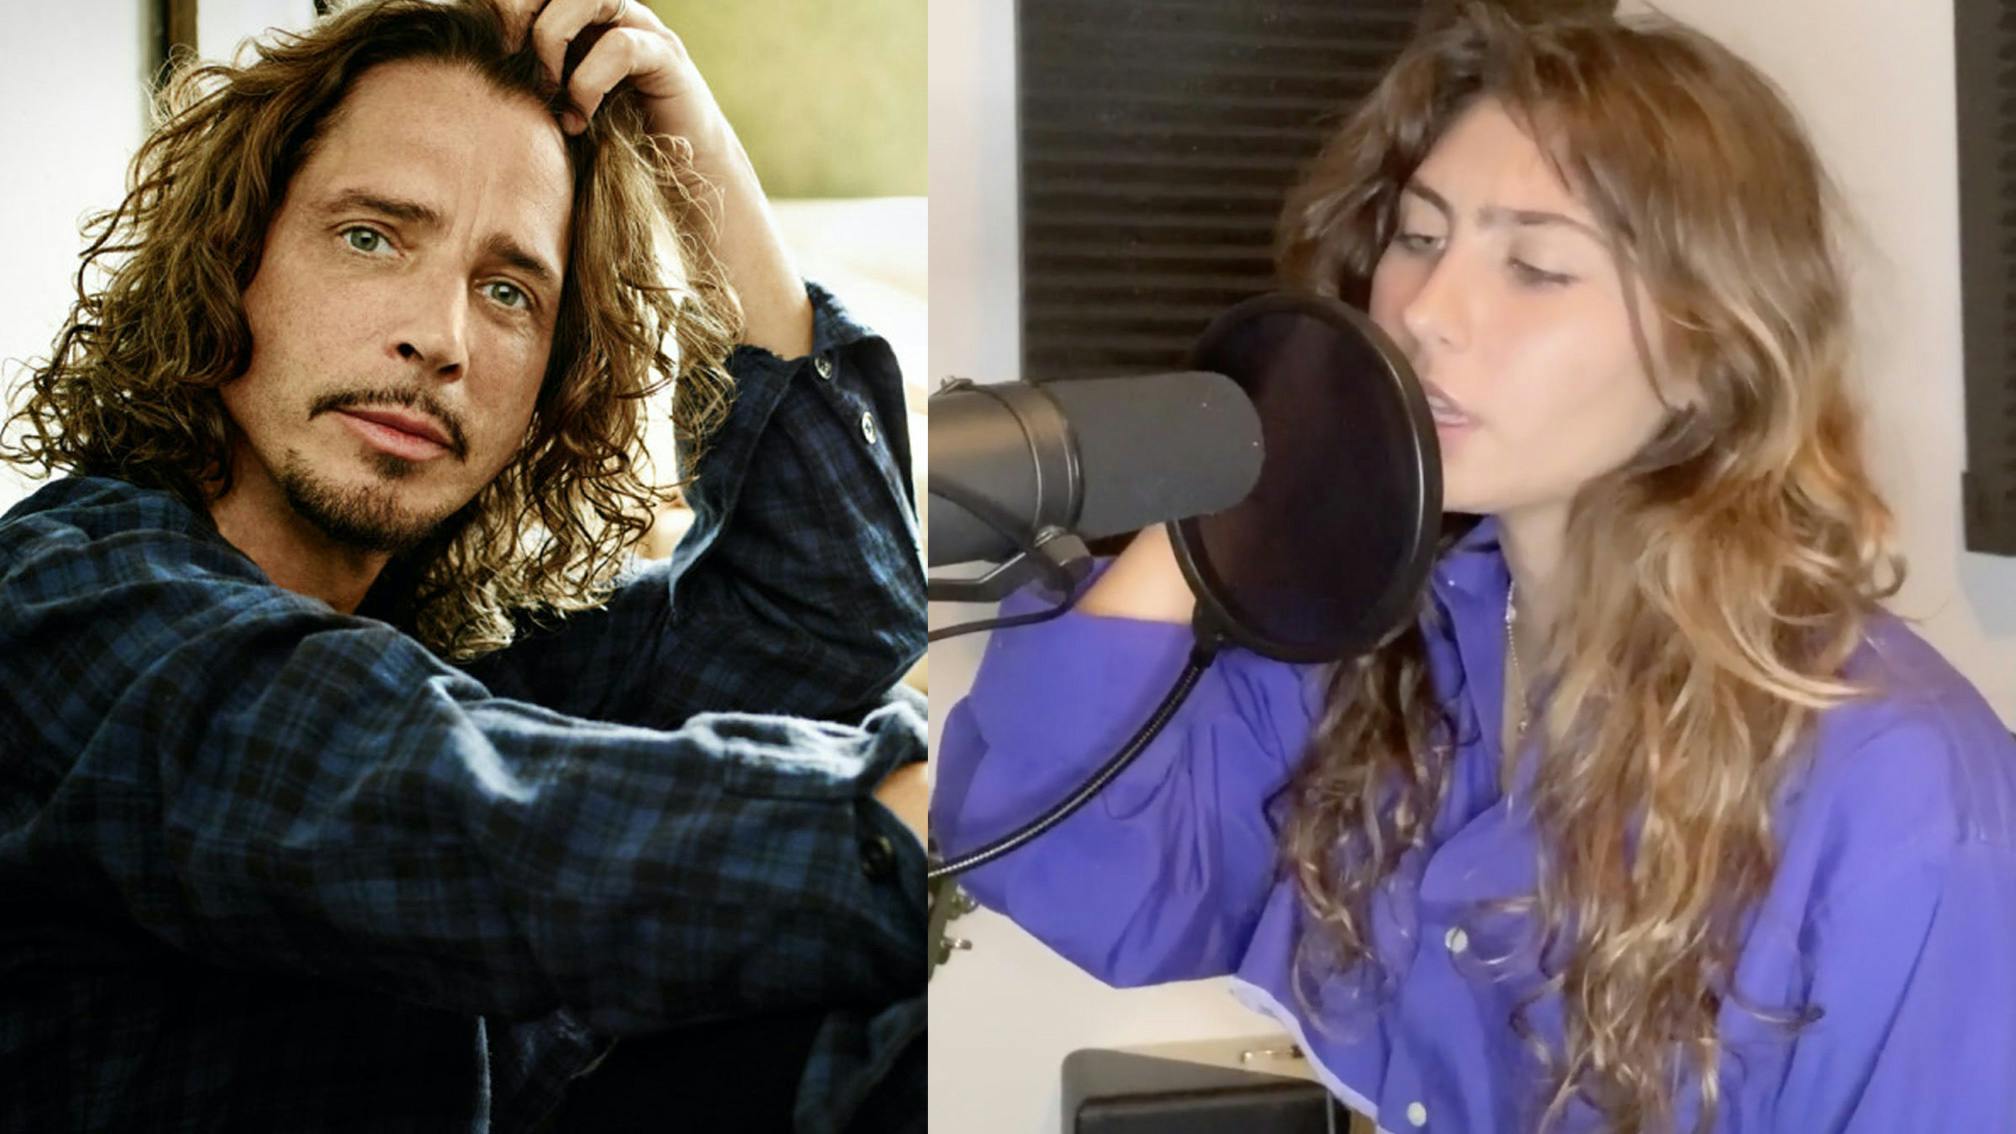 Toni Cornell Covers Pearl Jam's Black In Heartfelt Tribute To Her Father, Chris